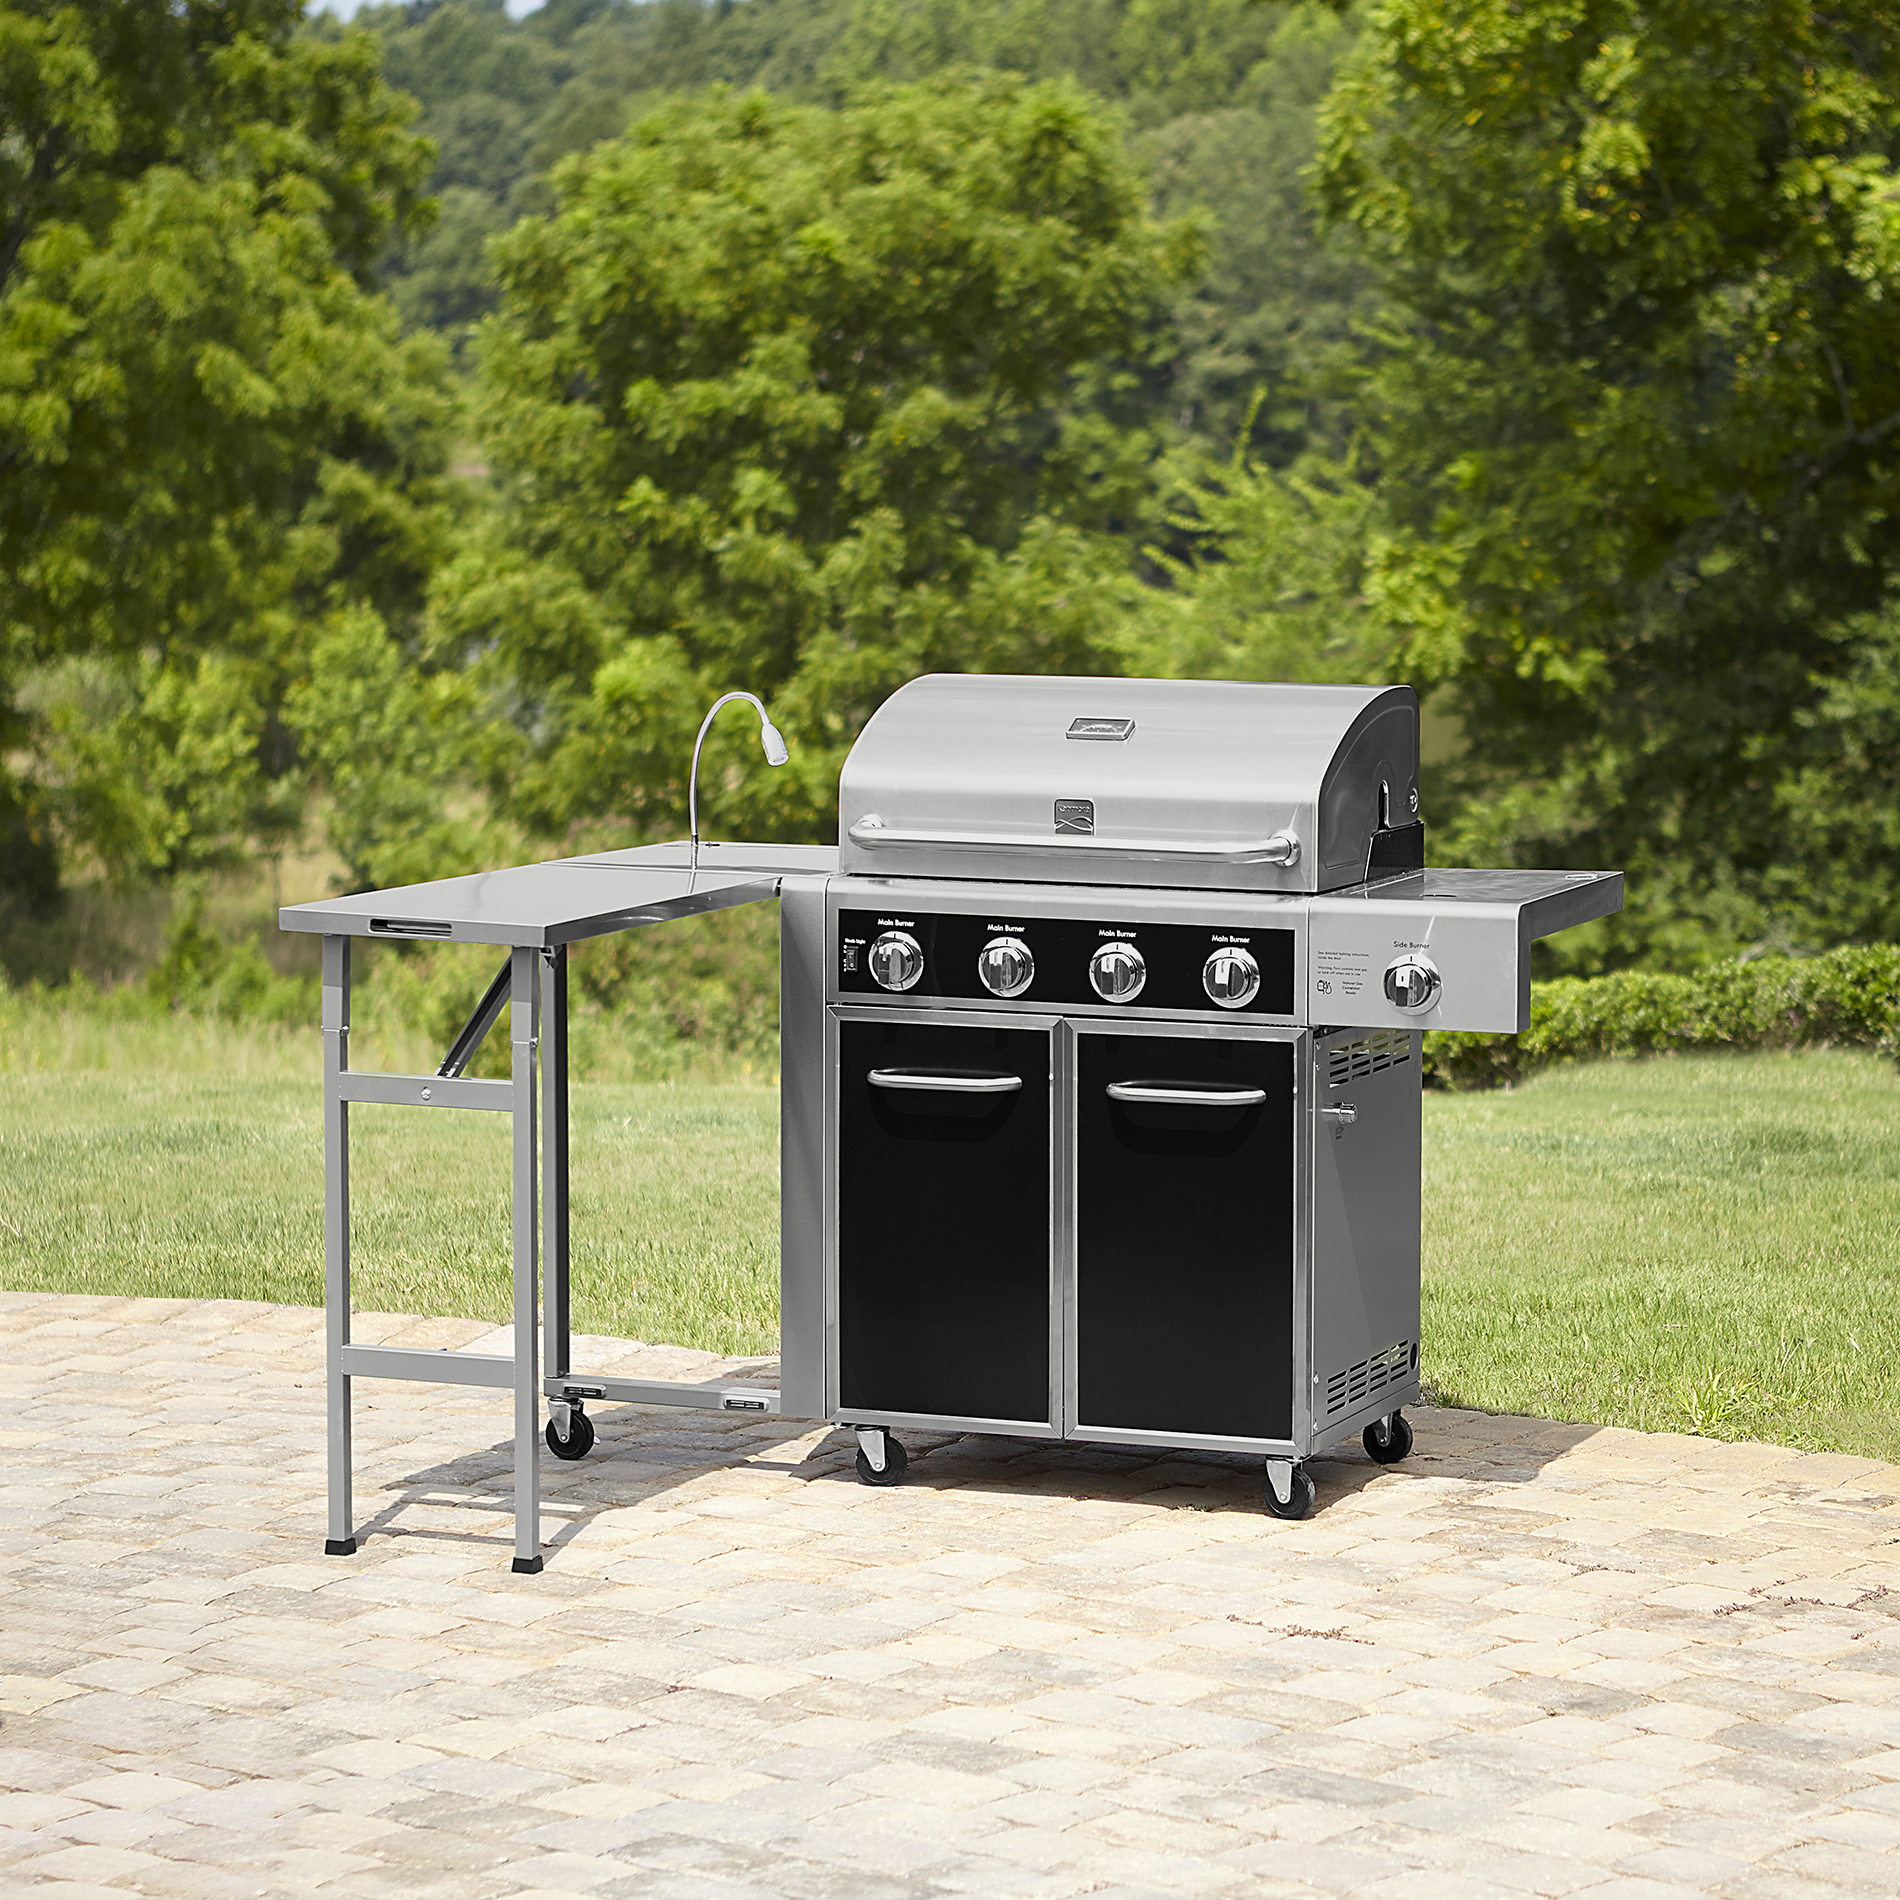 kenmore burner dual fuel gas grill with folding side table and led spin prod outdoor for bbq prep light limited availability your way ping earn points blue end tables living room